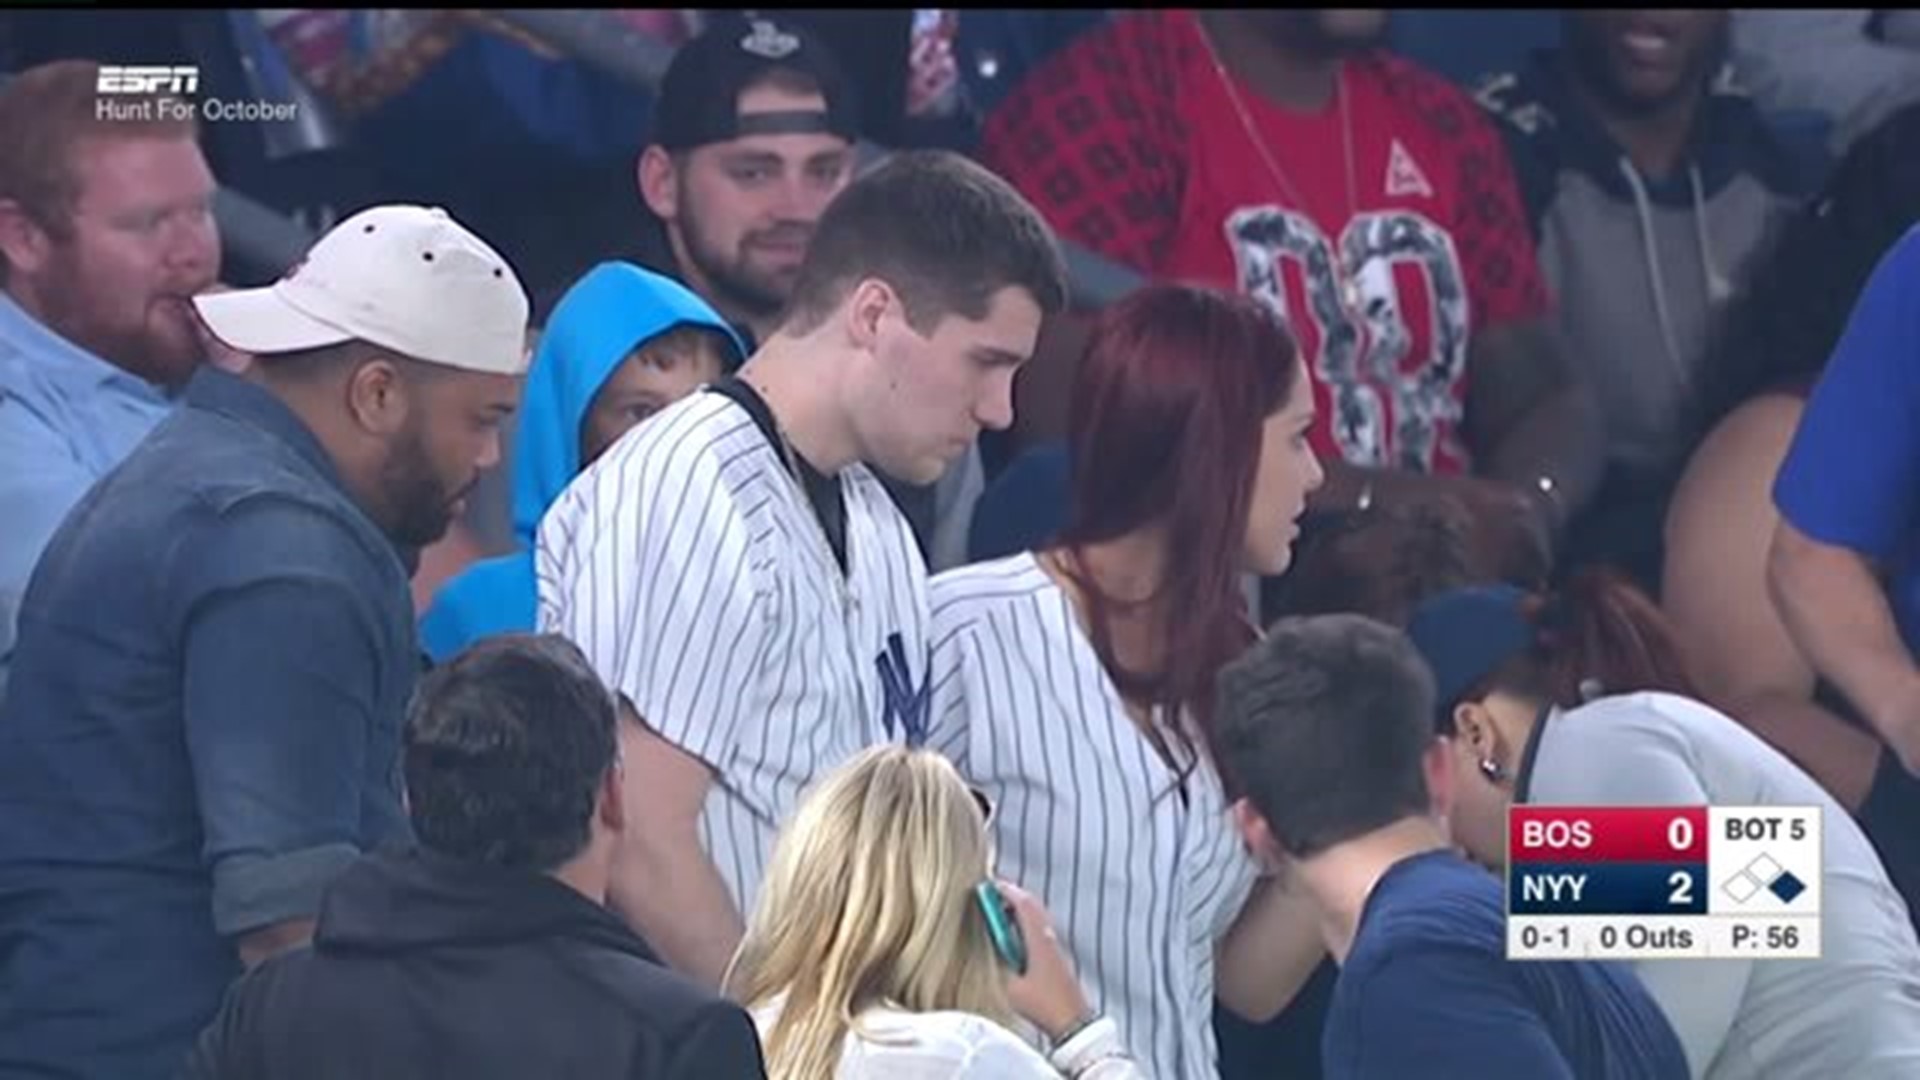 Baseball game proposal Almost gone wrong